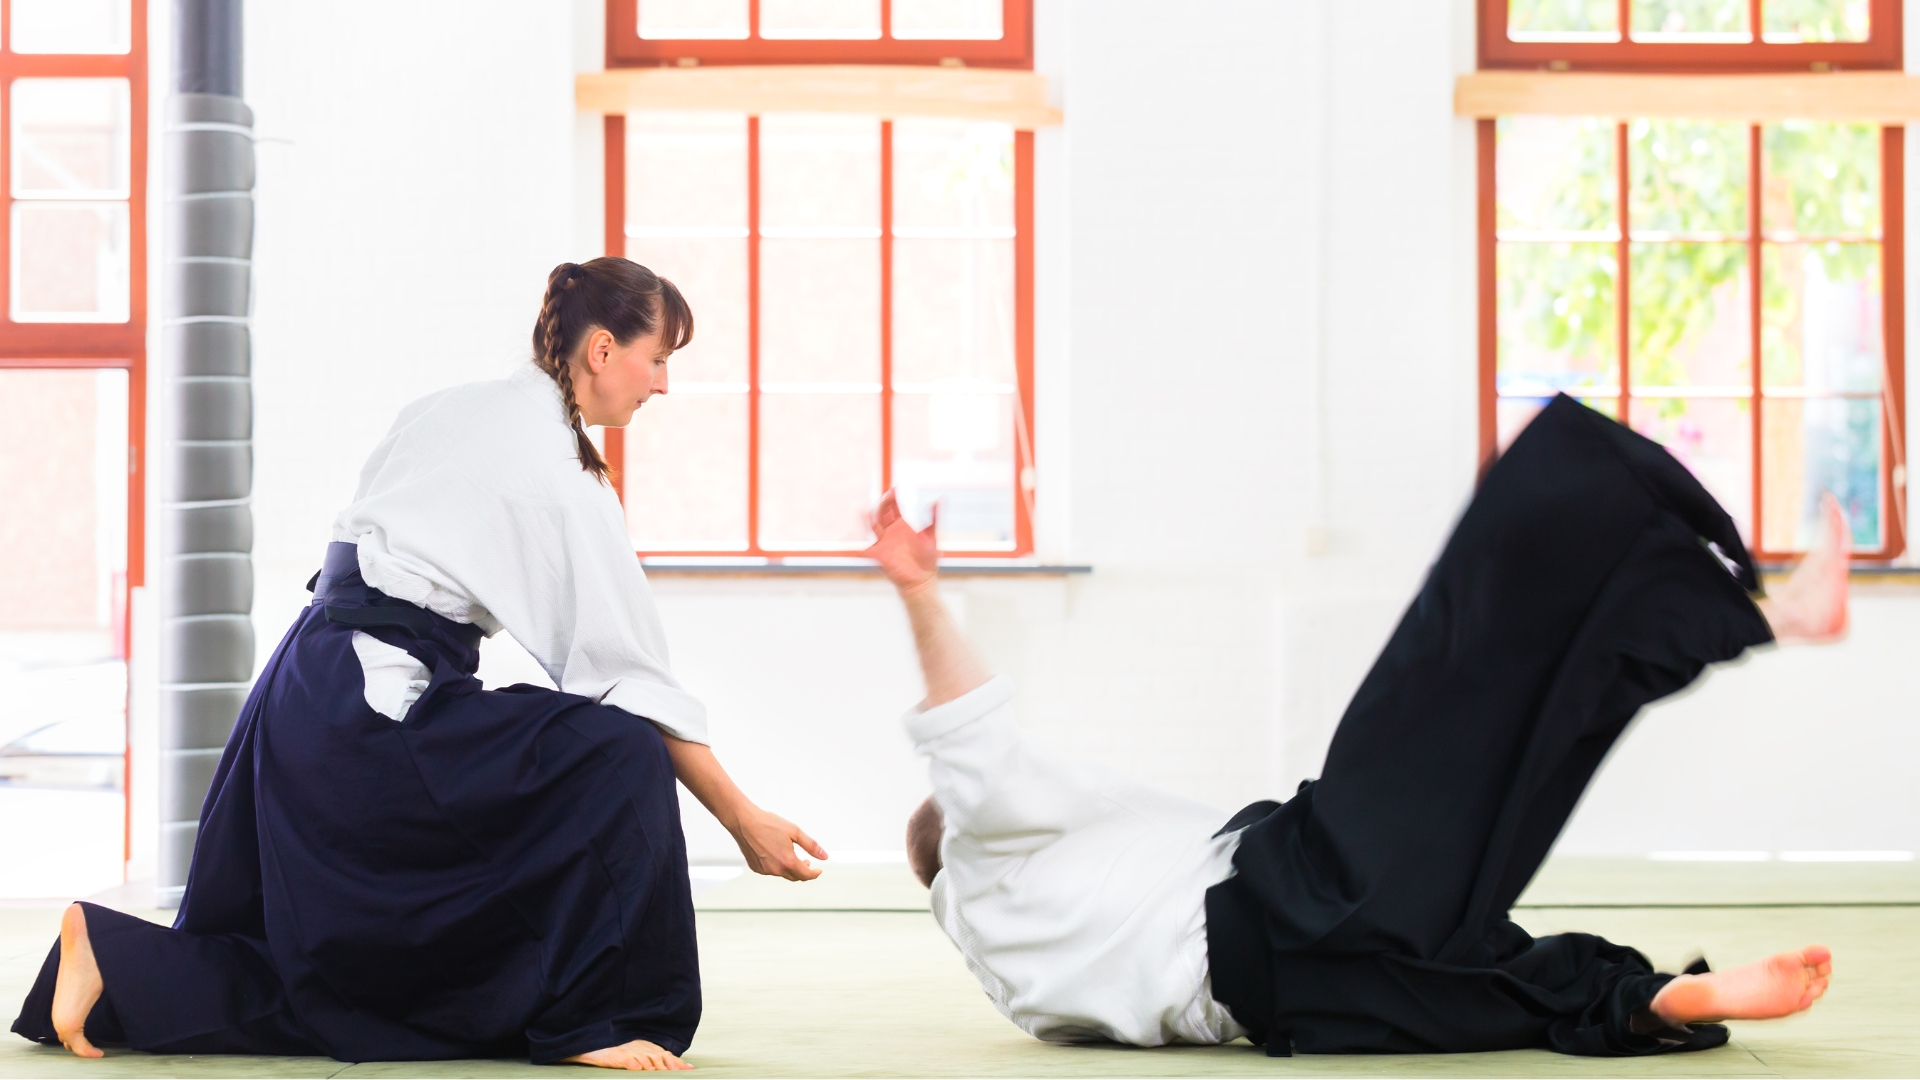 Comparing Hapkido vs Aikido by showing a martial arts student beating another in a dojo.